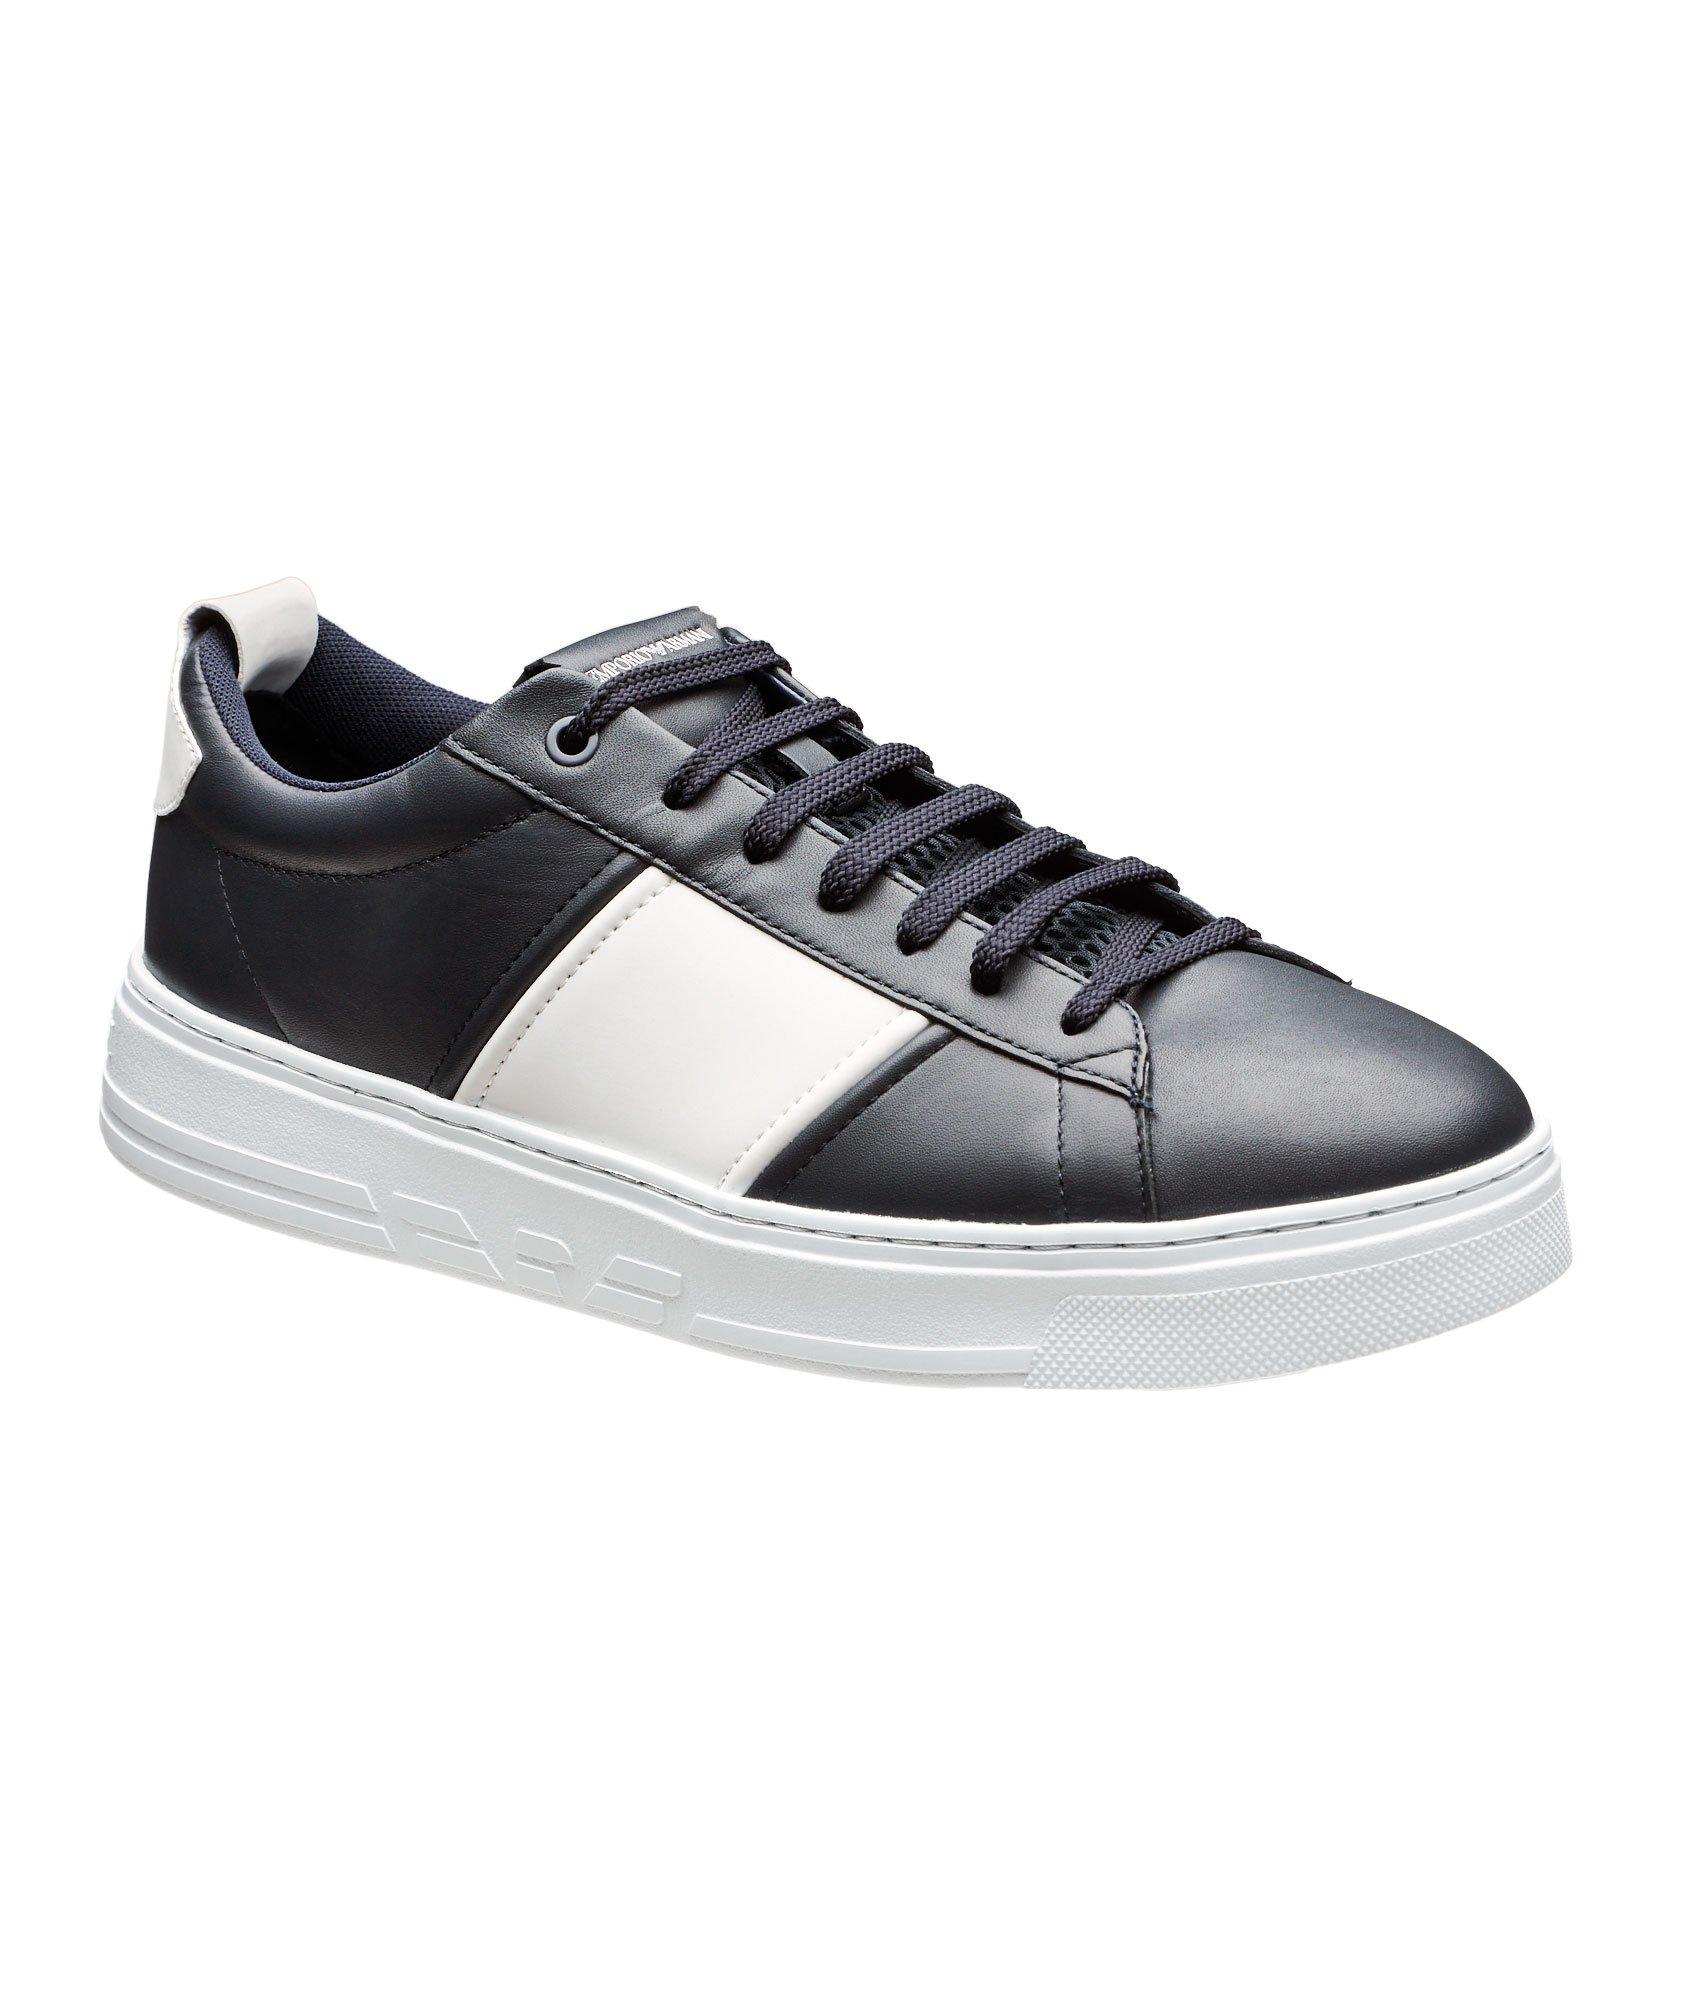 Leather Low-Top Sneakers image 0